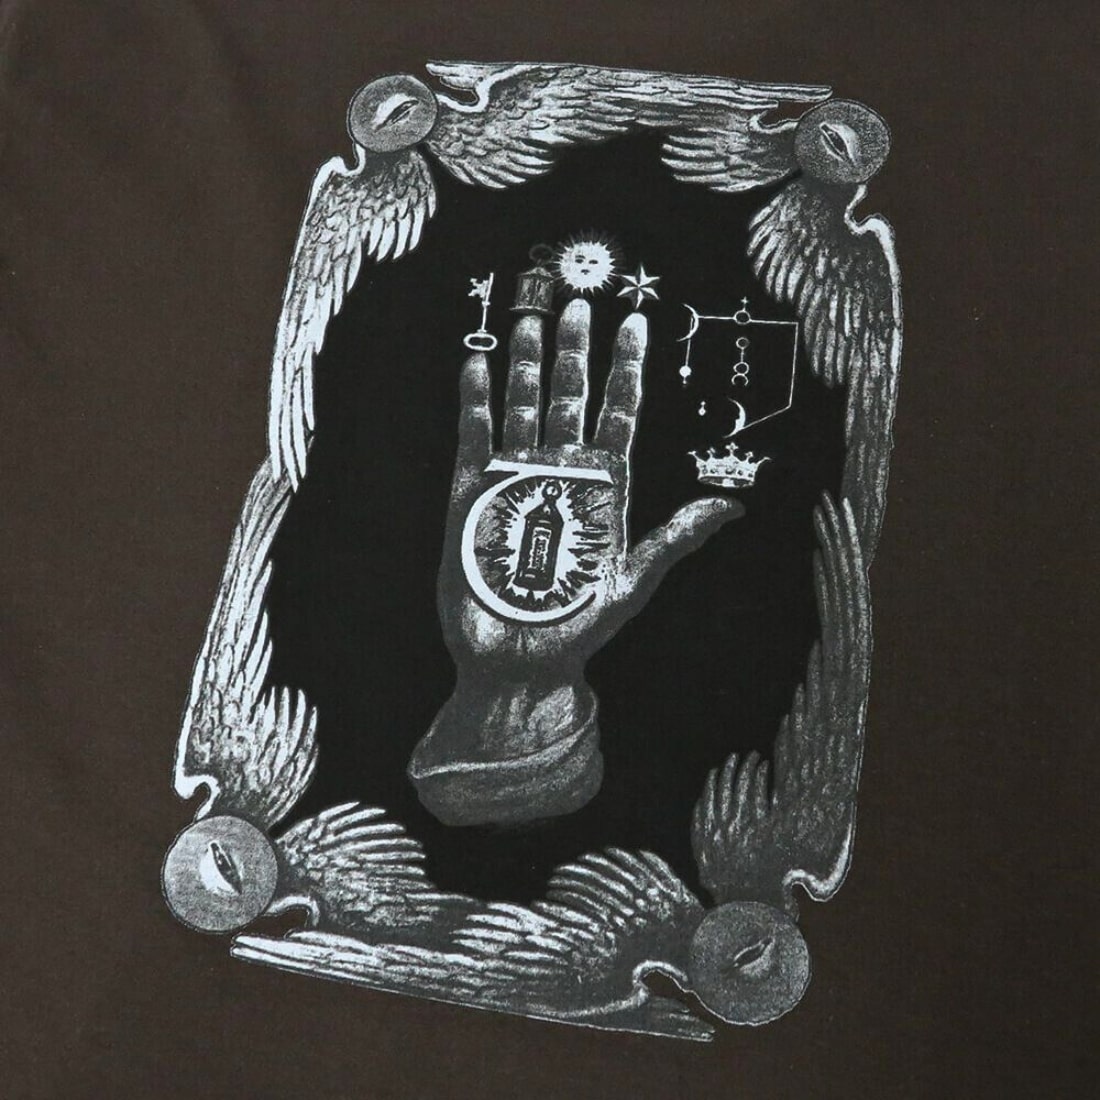 Theories Hand Of Theories Longsleeve T-Shirt - Brown - Mens Graphic T-Shirt by Theories